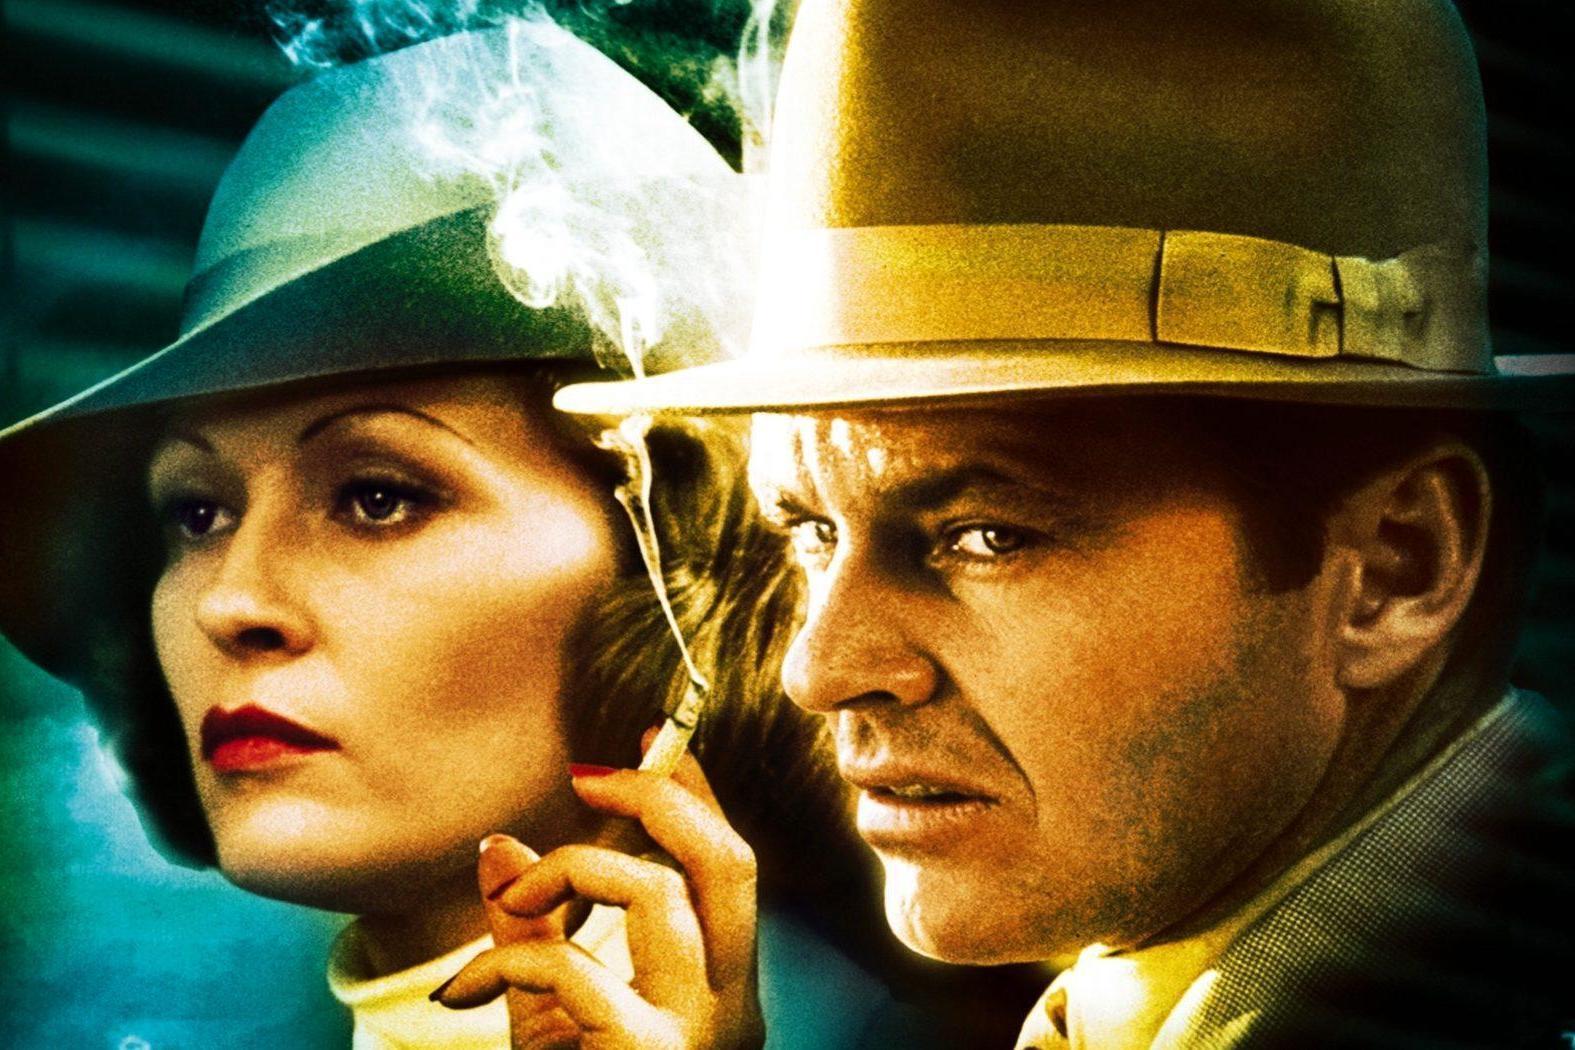 10 best neo-noir films of all time: From Chinatown to LA Confidential